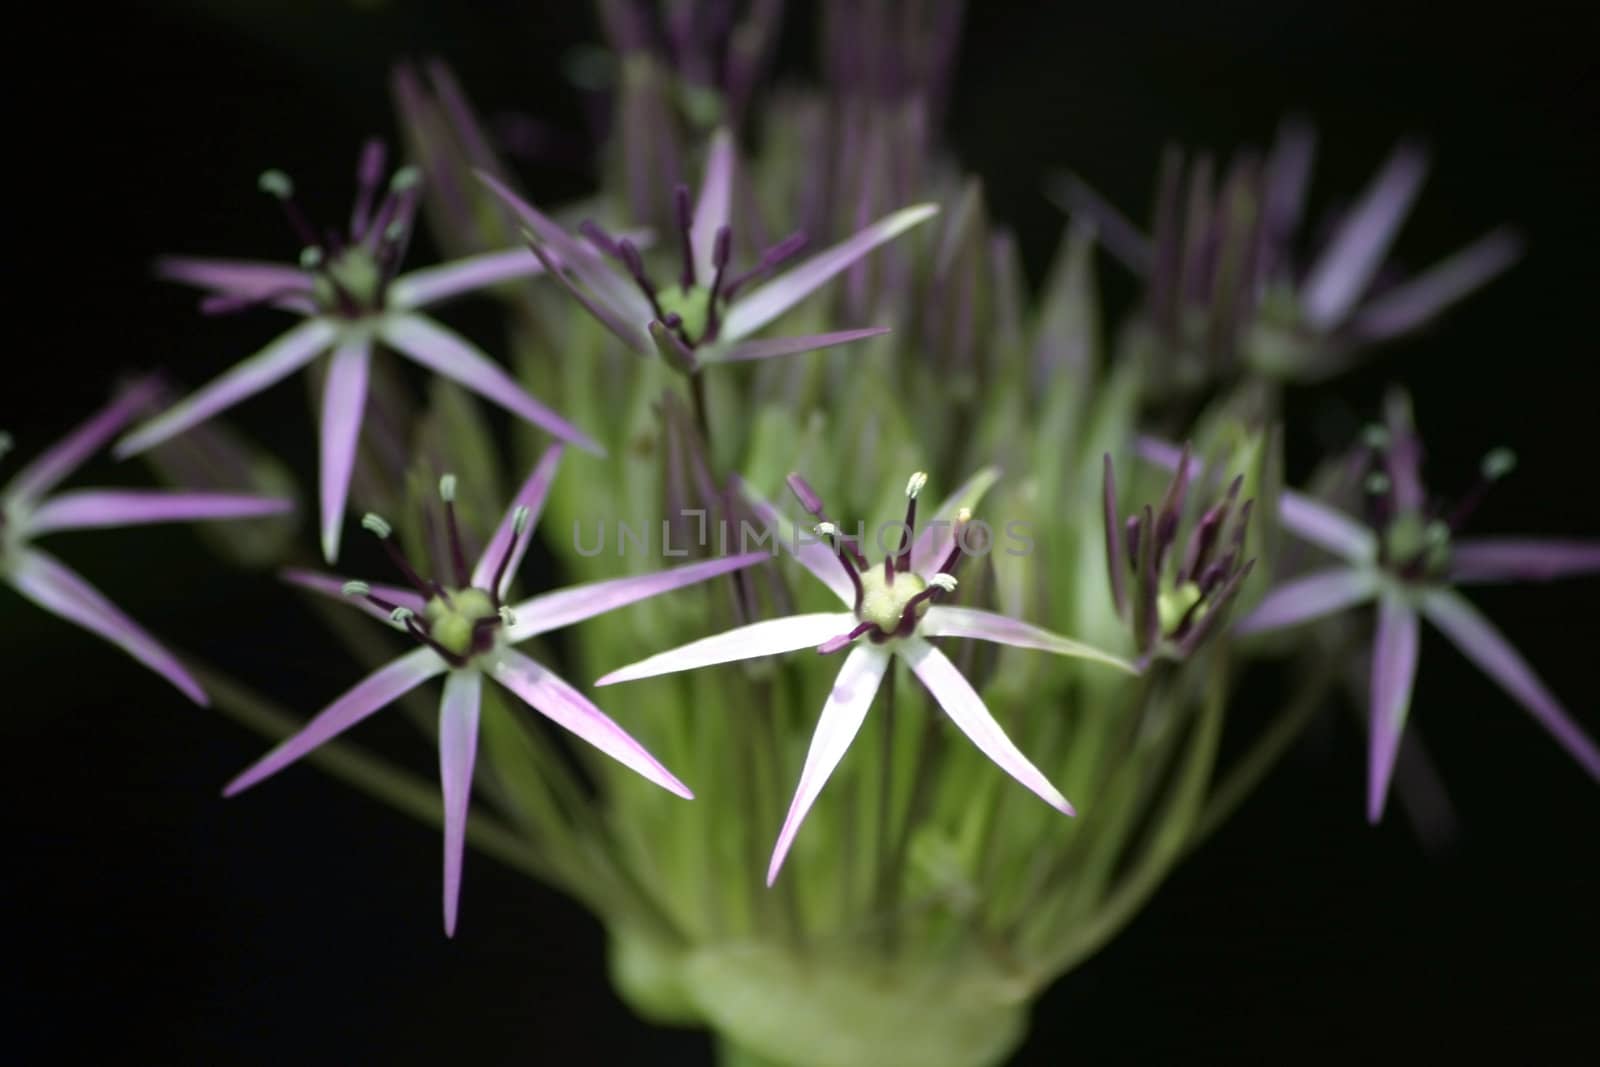 Young Allium Flower by micahbowerbank